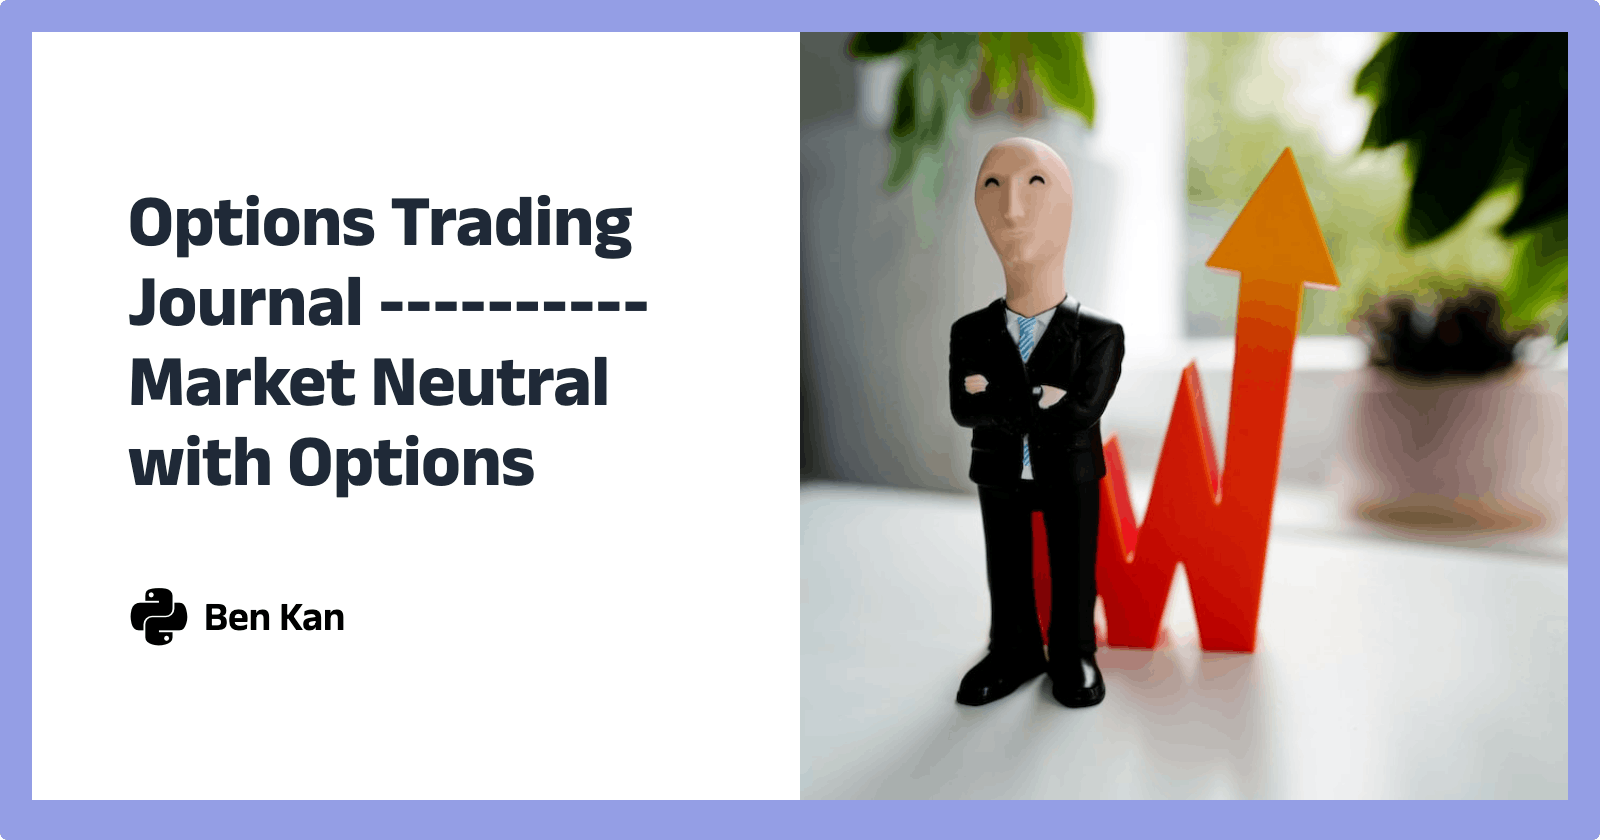 Options Trading Journal (1) - Market Neutral with Options